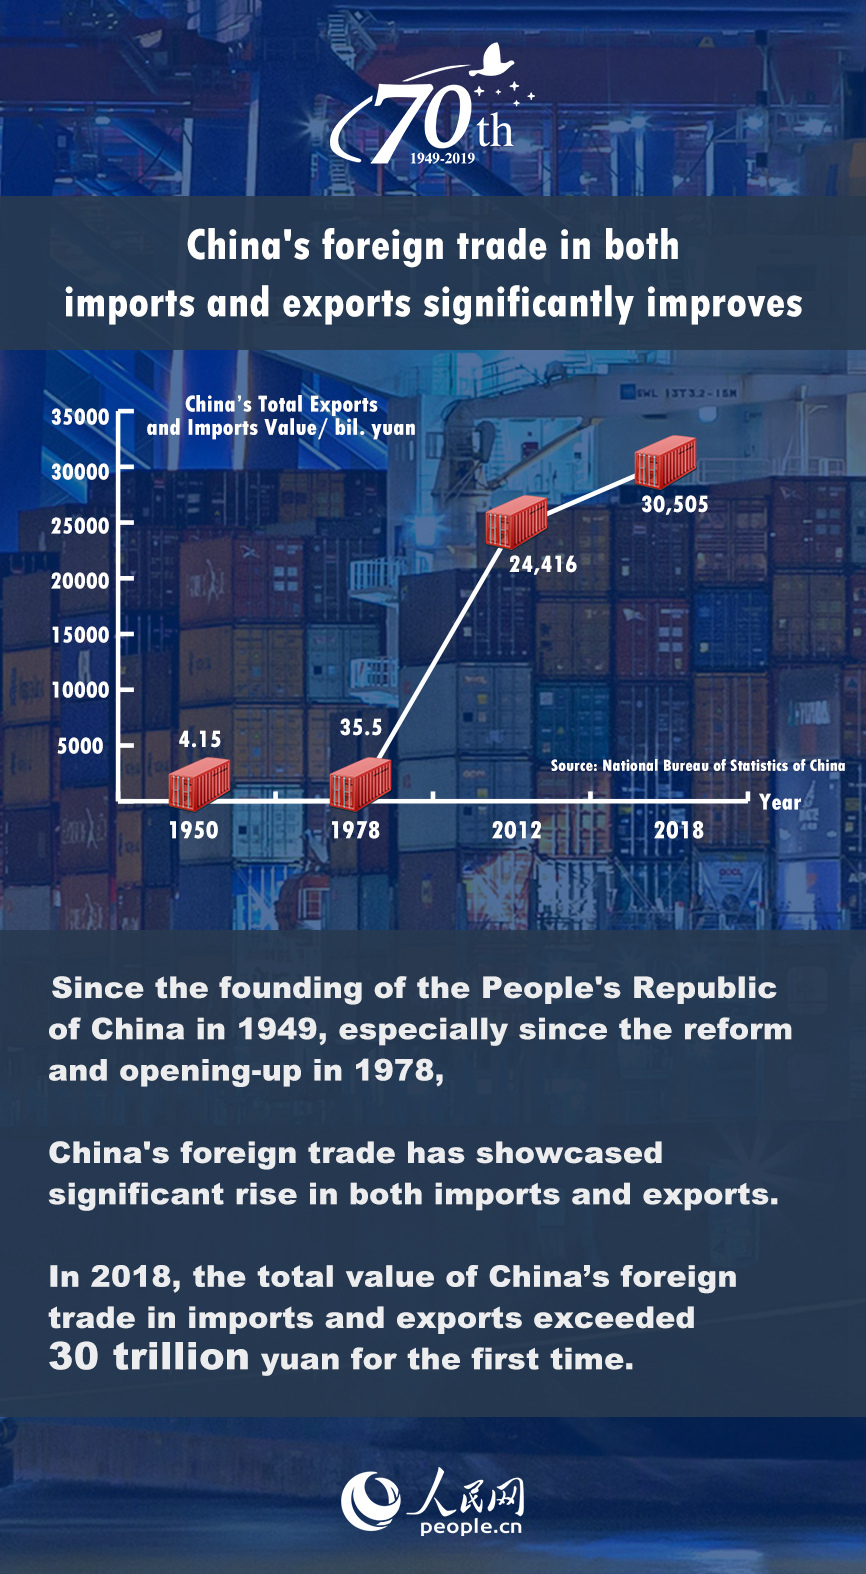 China in 70 years: China's foreign trade in both imports and exports significantly improves